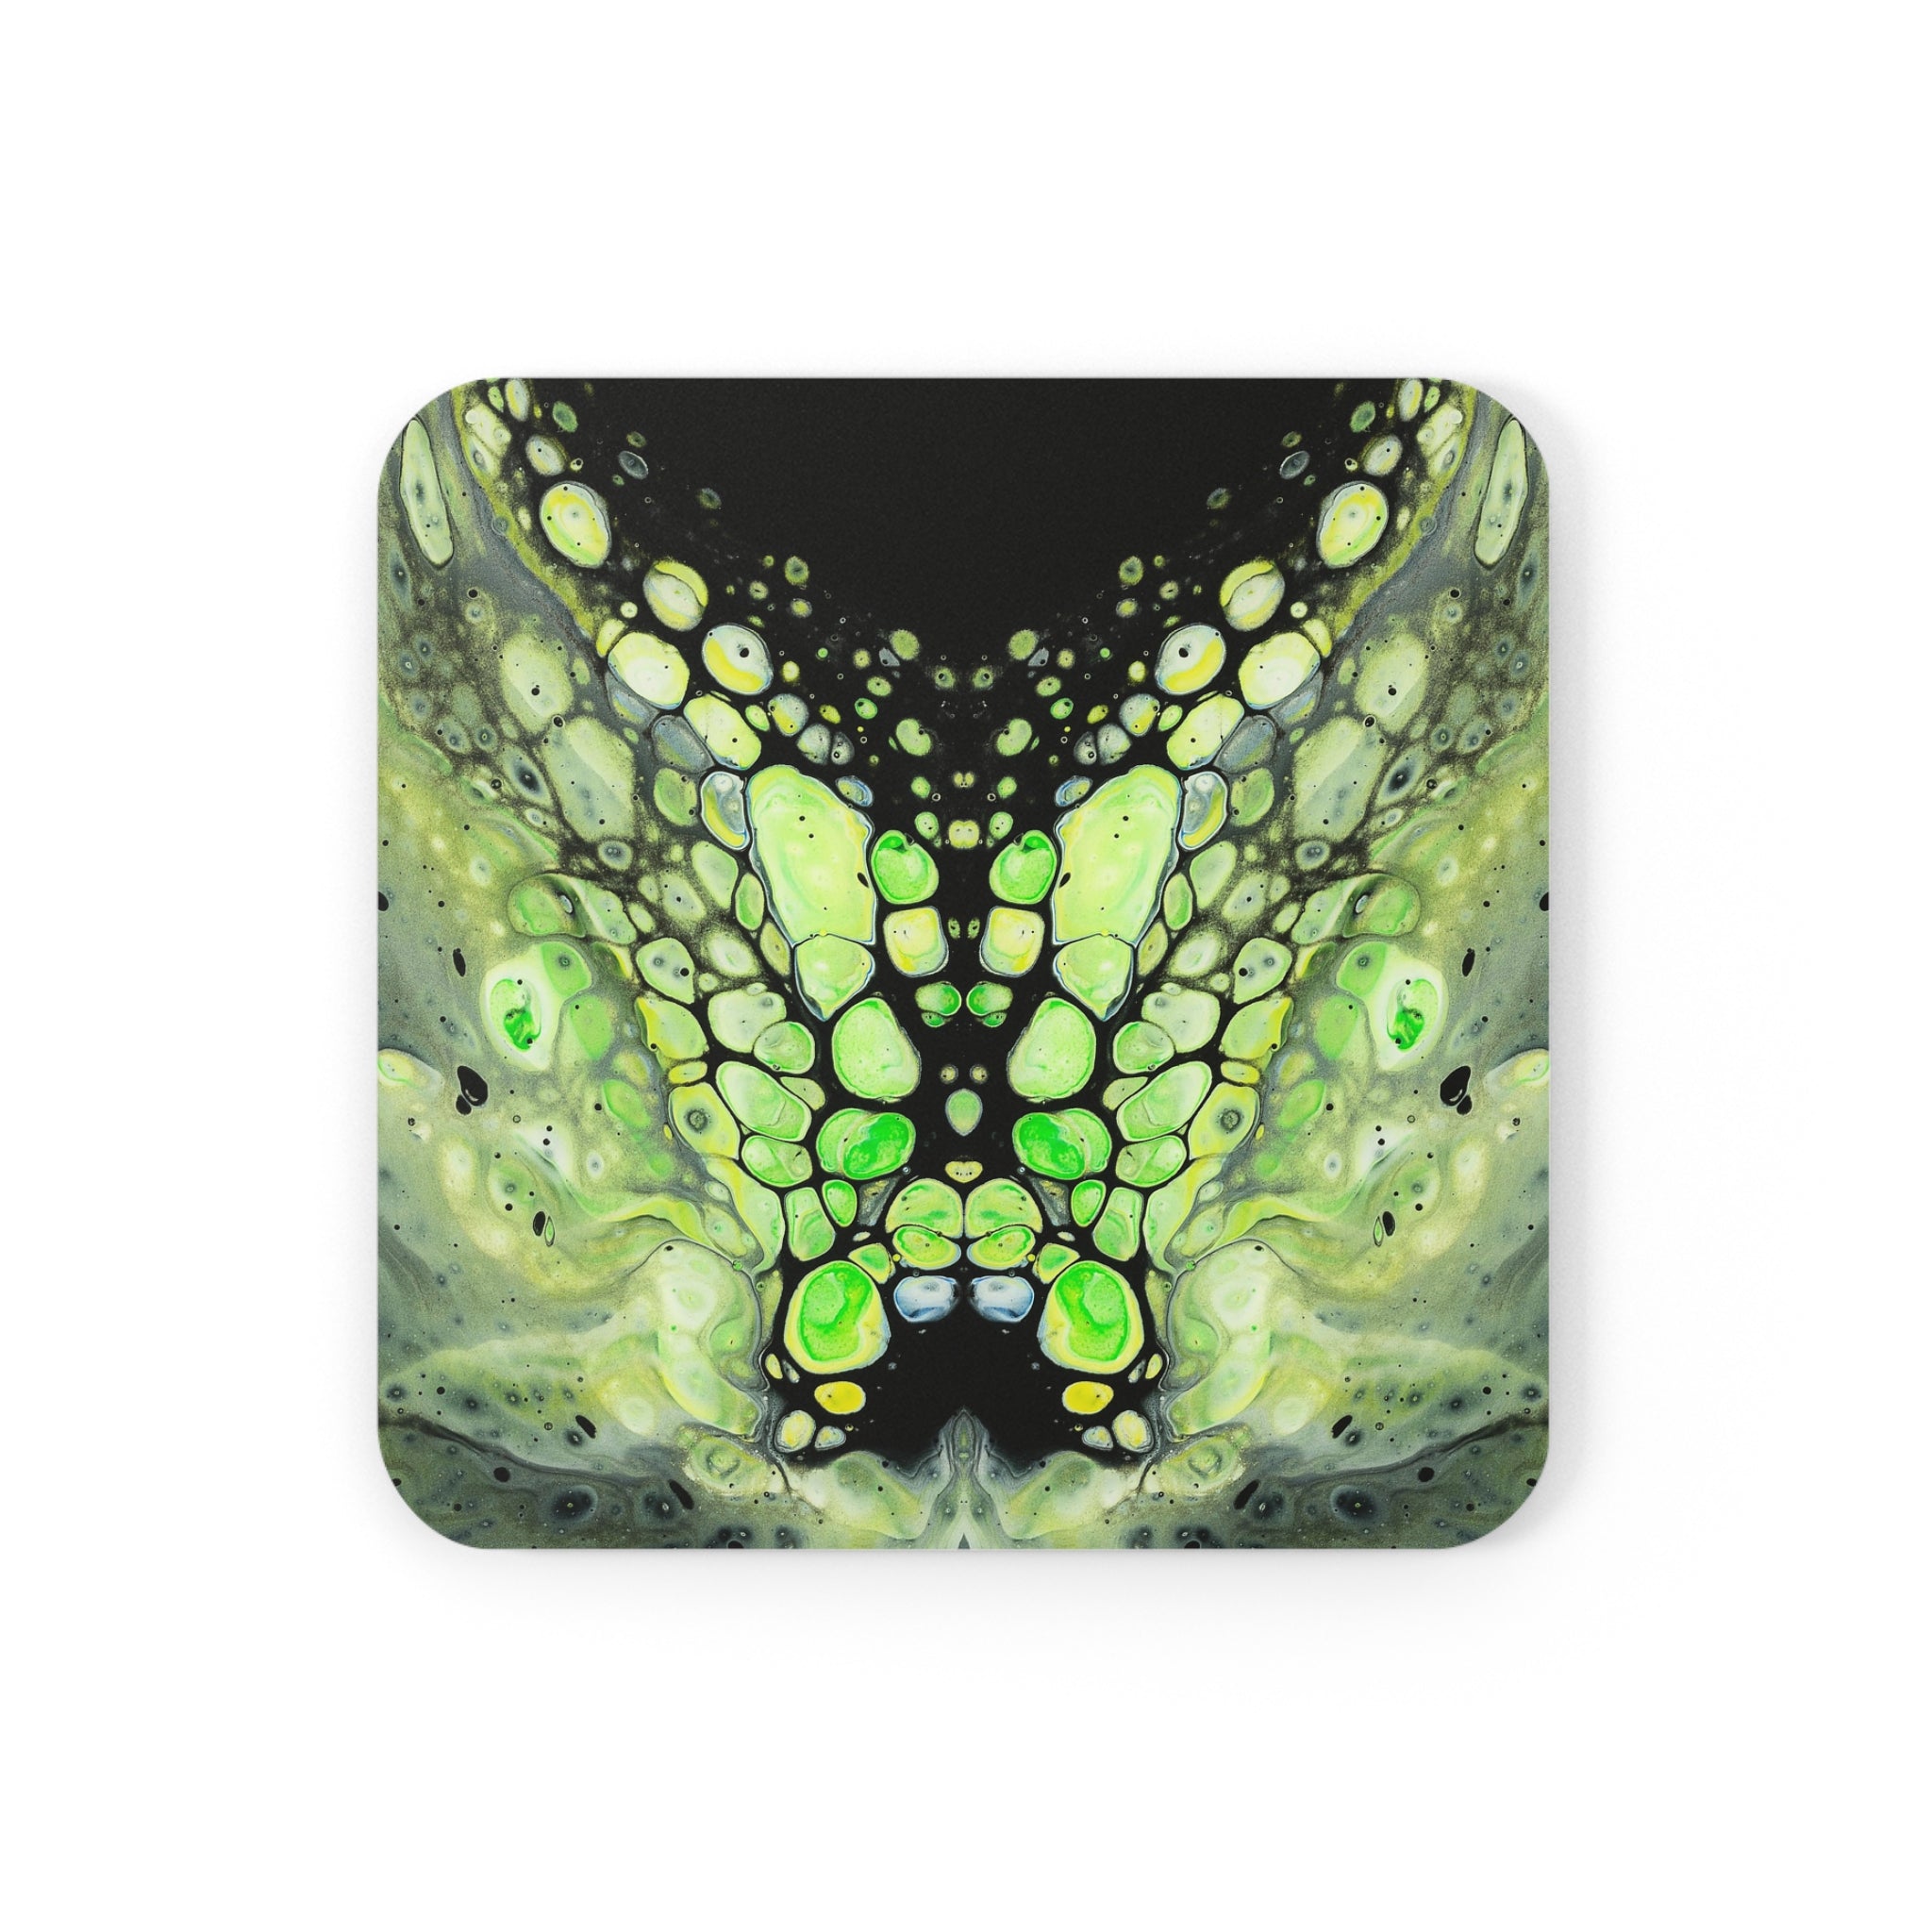 Cameron Creations - Floating Asteroids - Stylish Coffee Coaster - Square Front